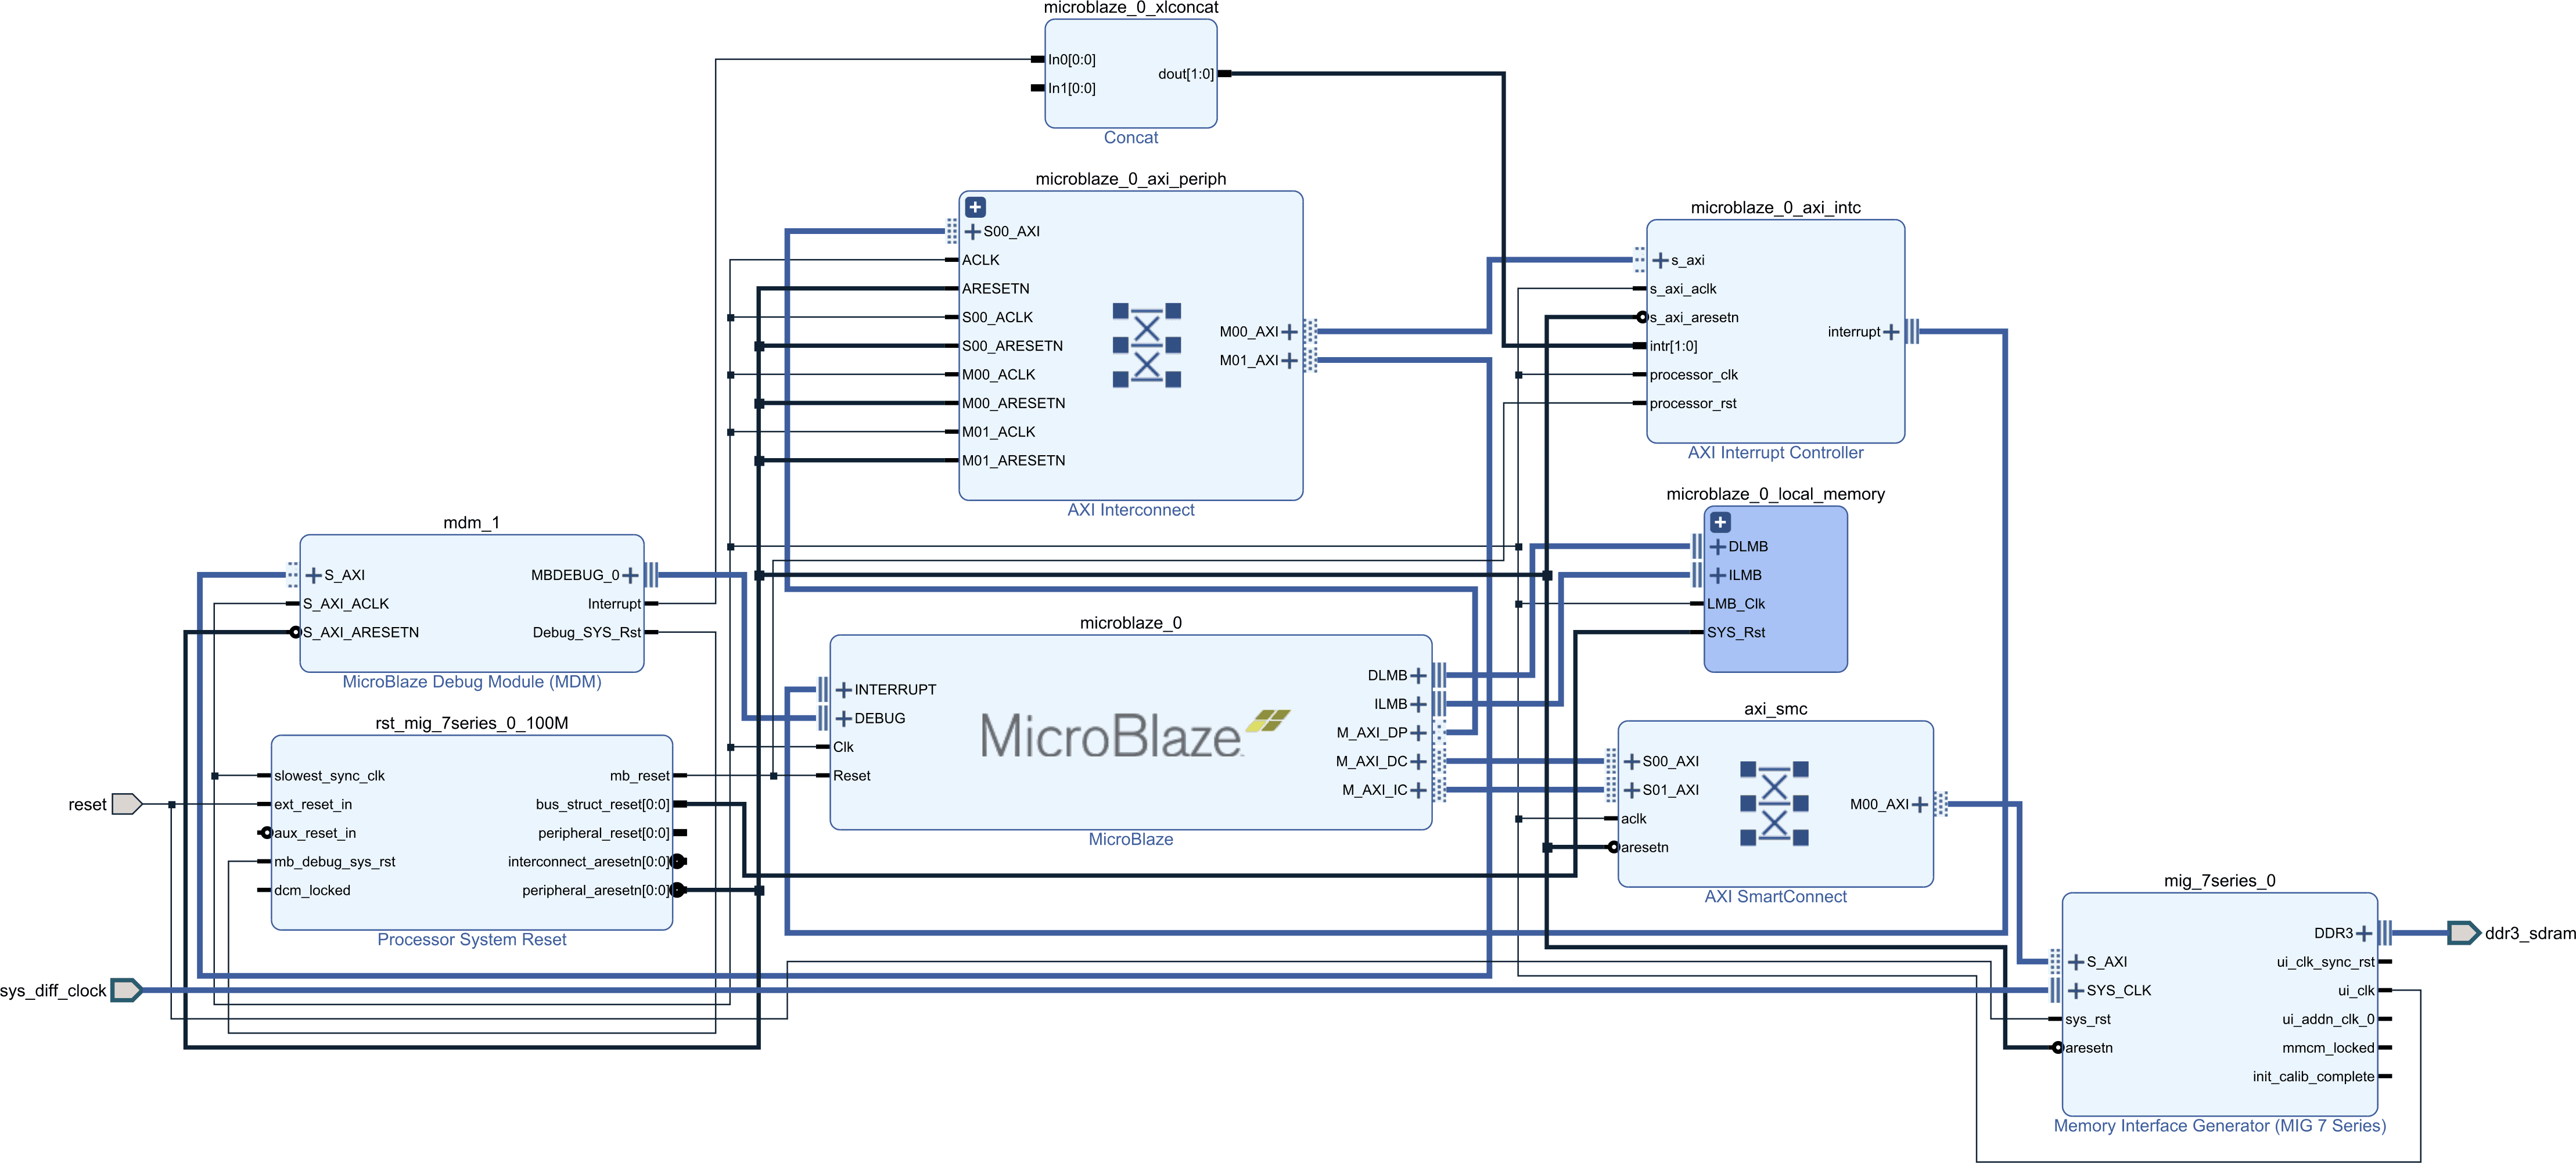 Block diagram of a MicroBlaze system using external SDRAM DDR memory for code and data storage.